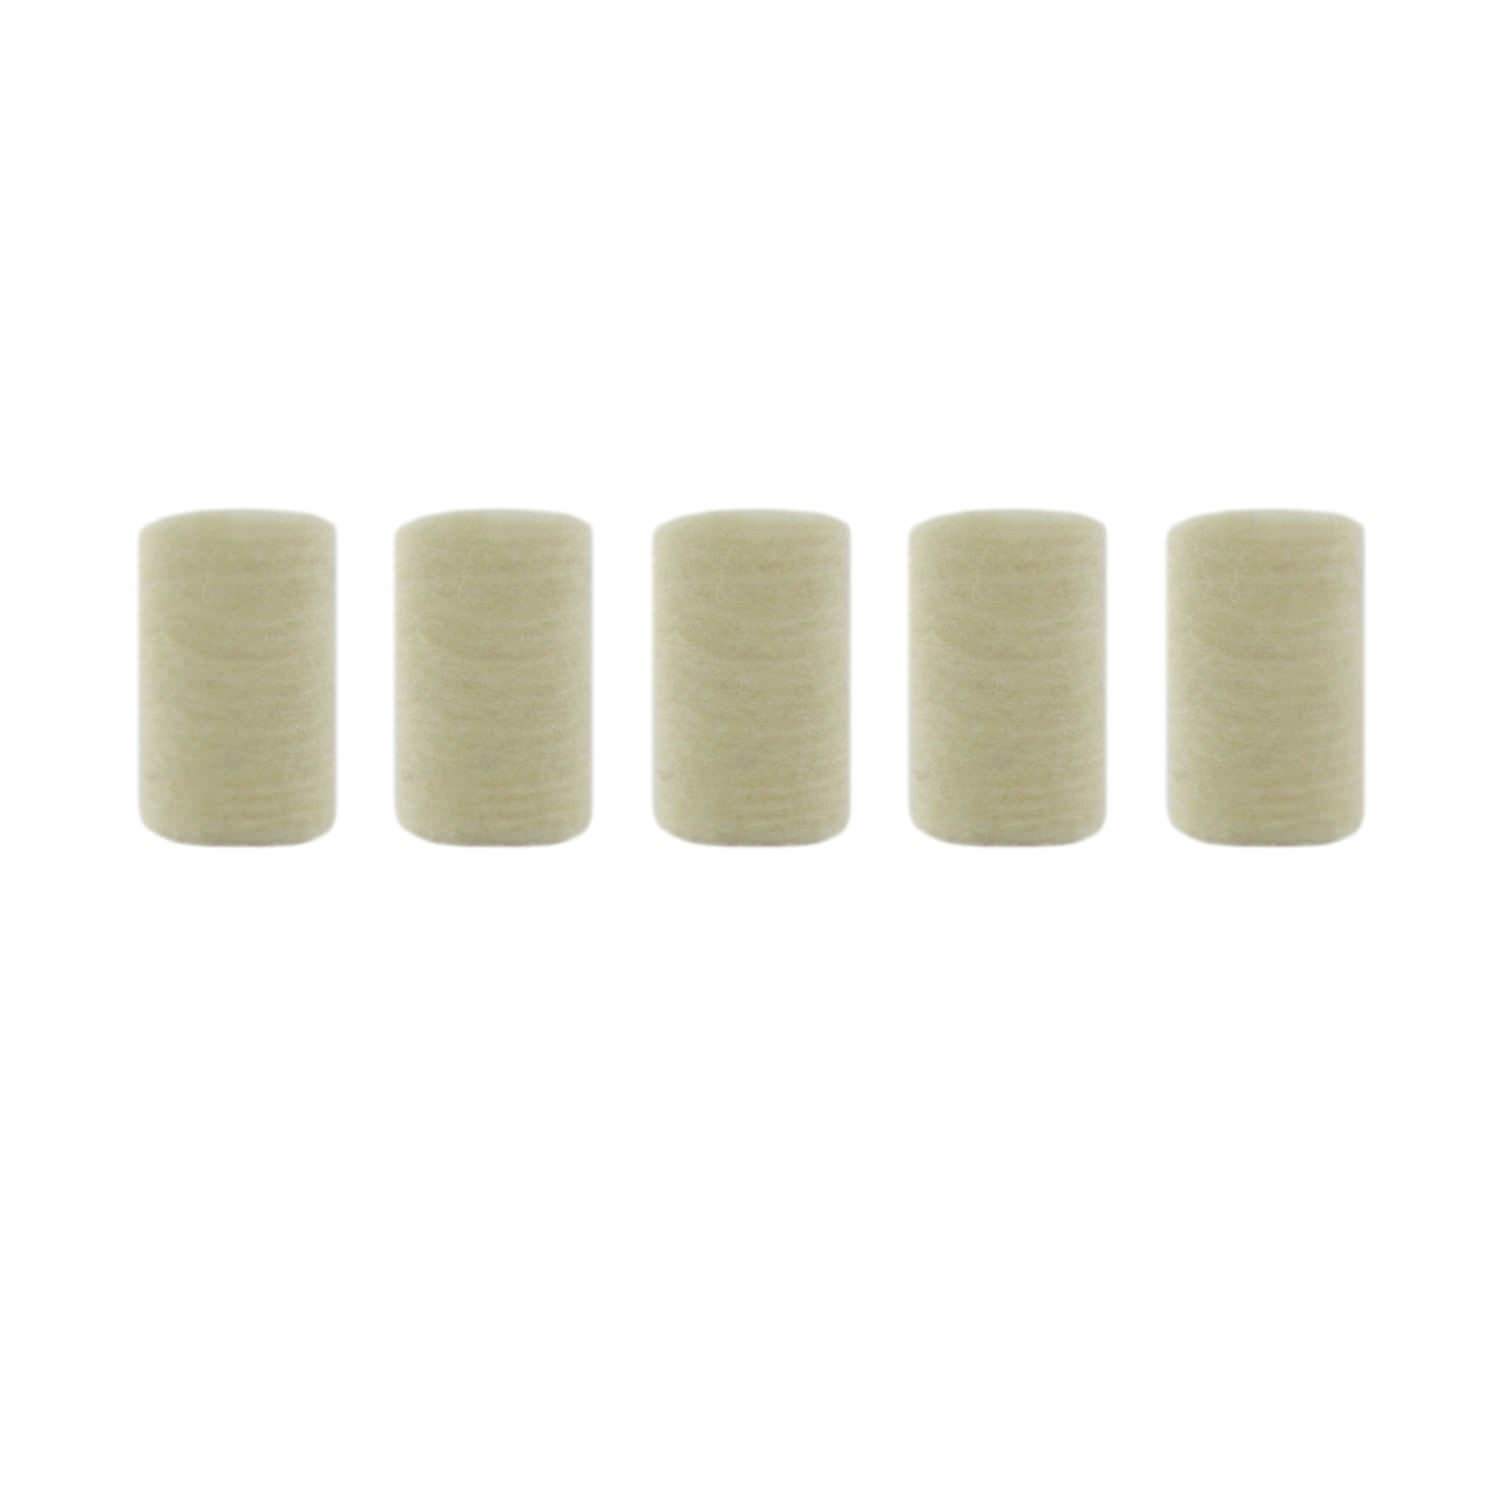 Devilbiss Pulmo Aide Replacement Filters for 5650 image 0